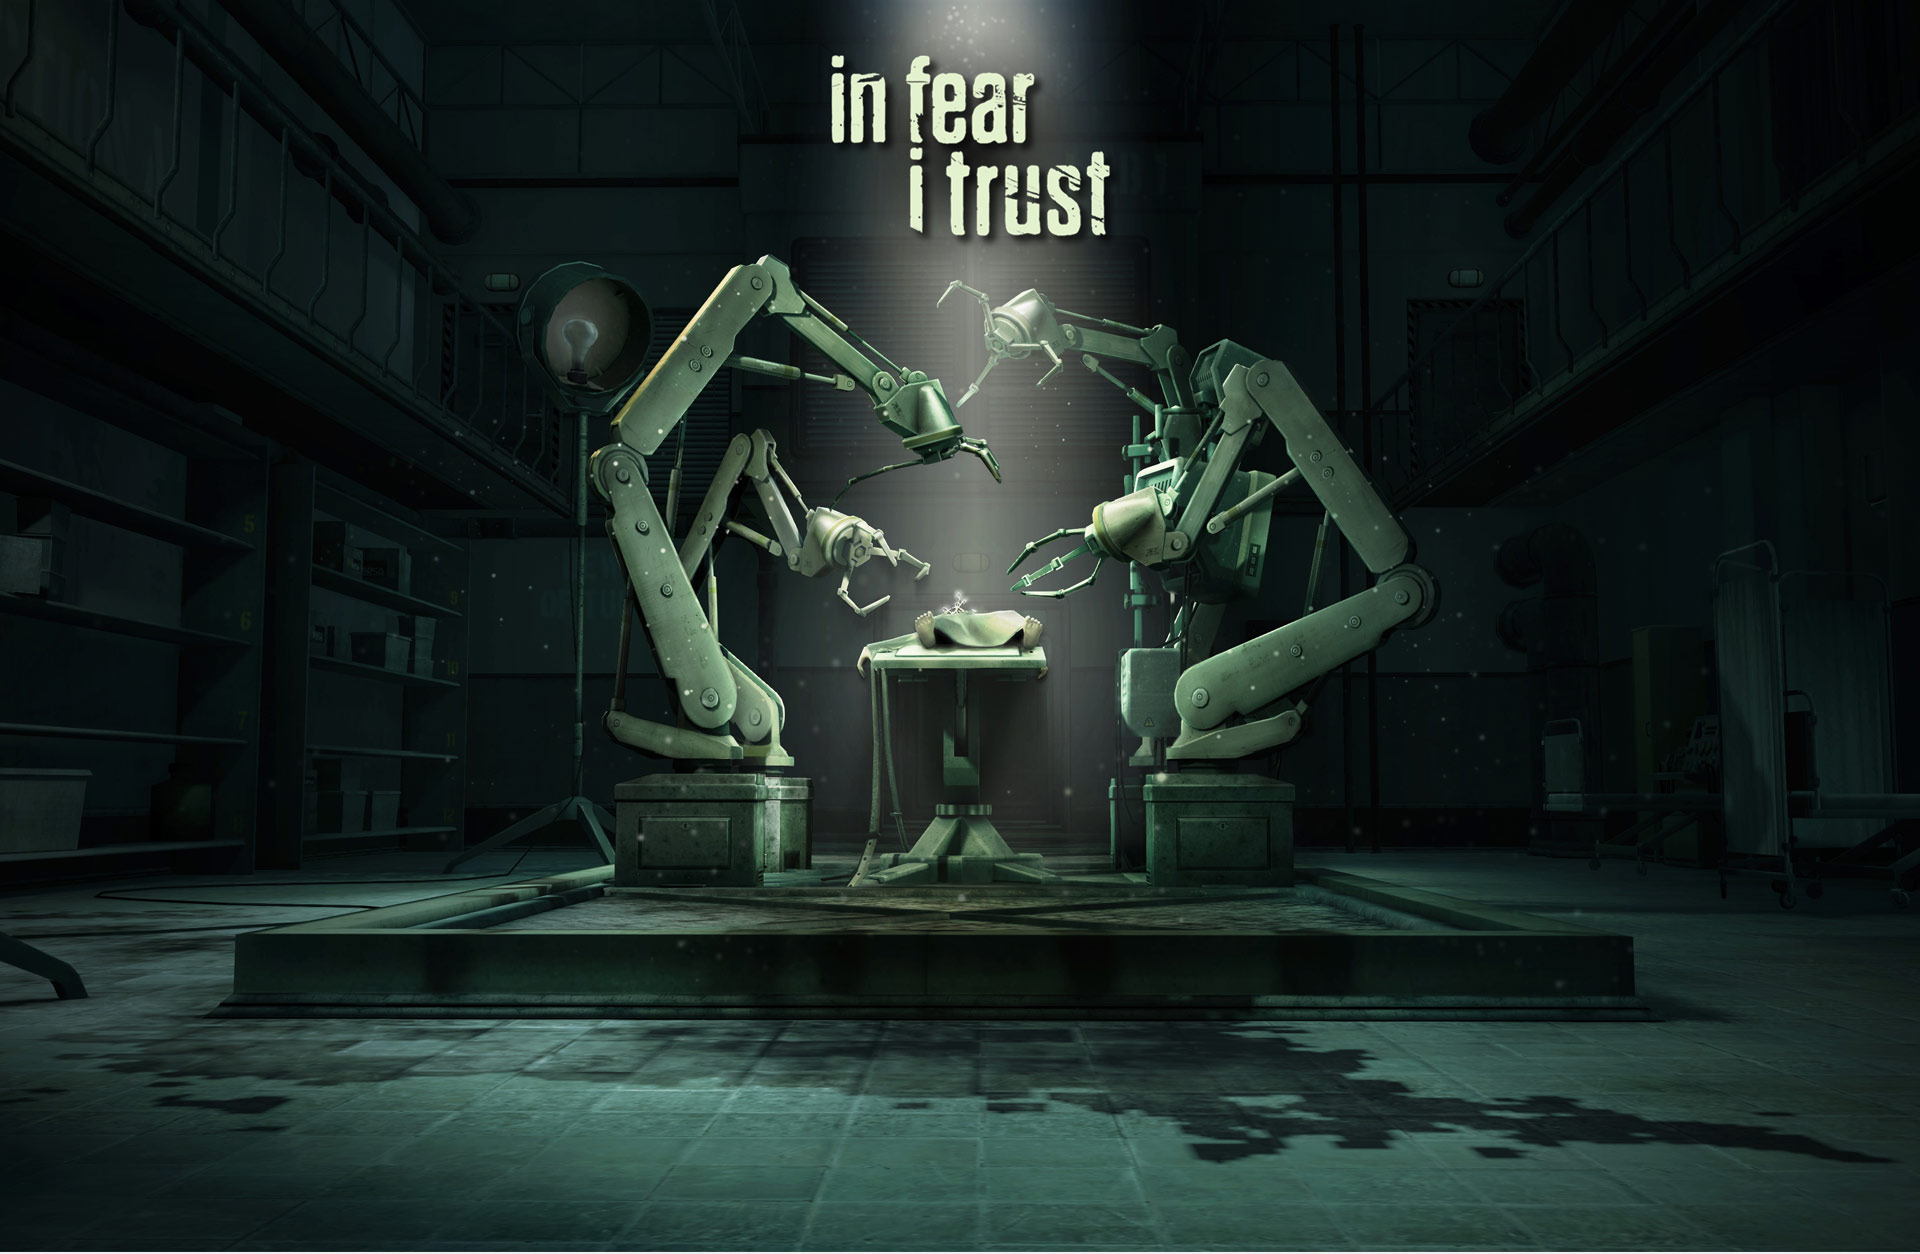 In Fear I Trust Episodes 1-4 Collection